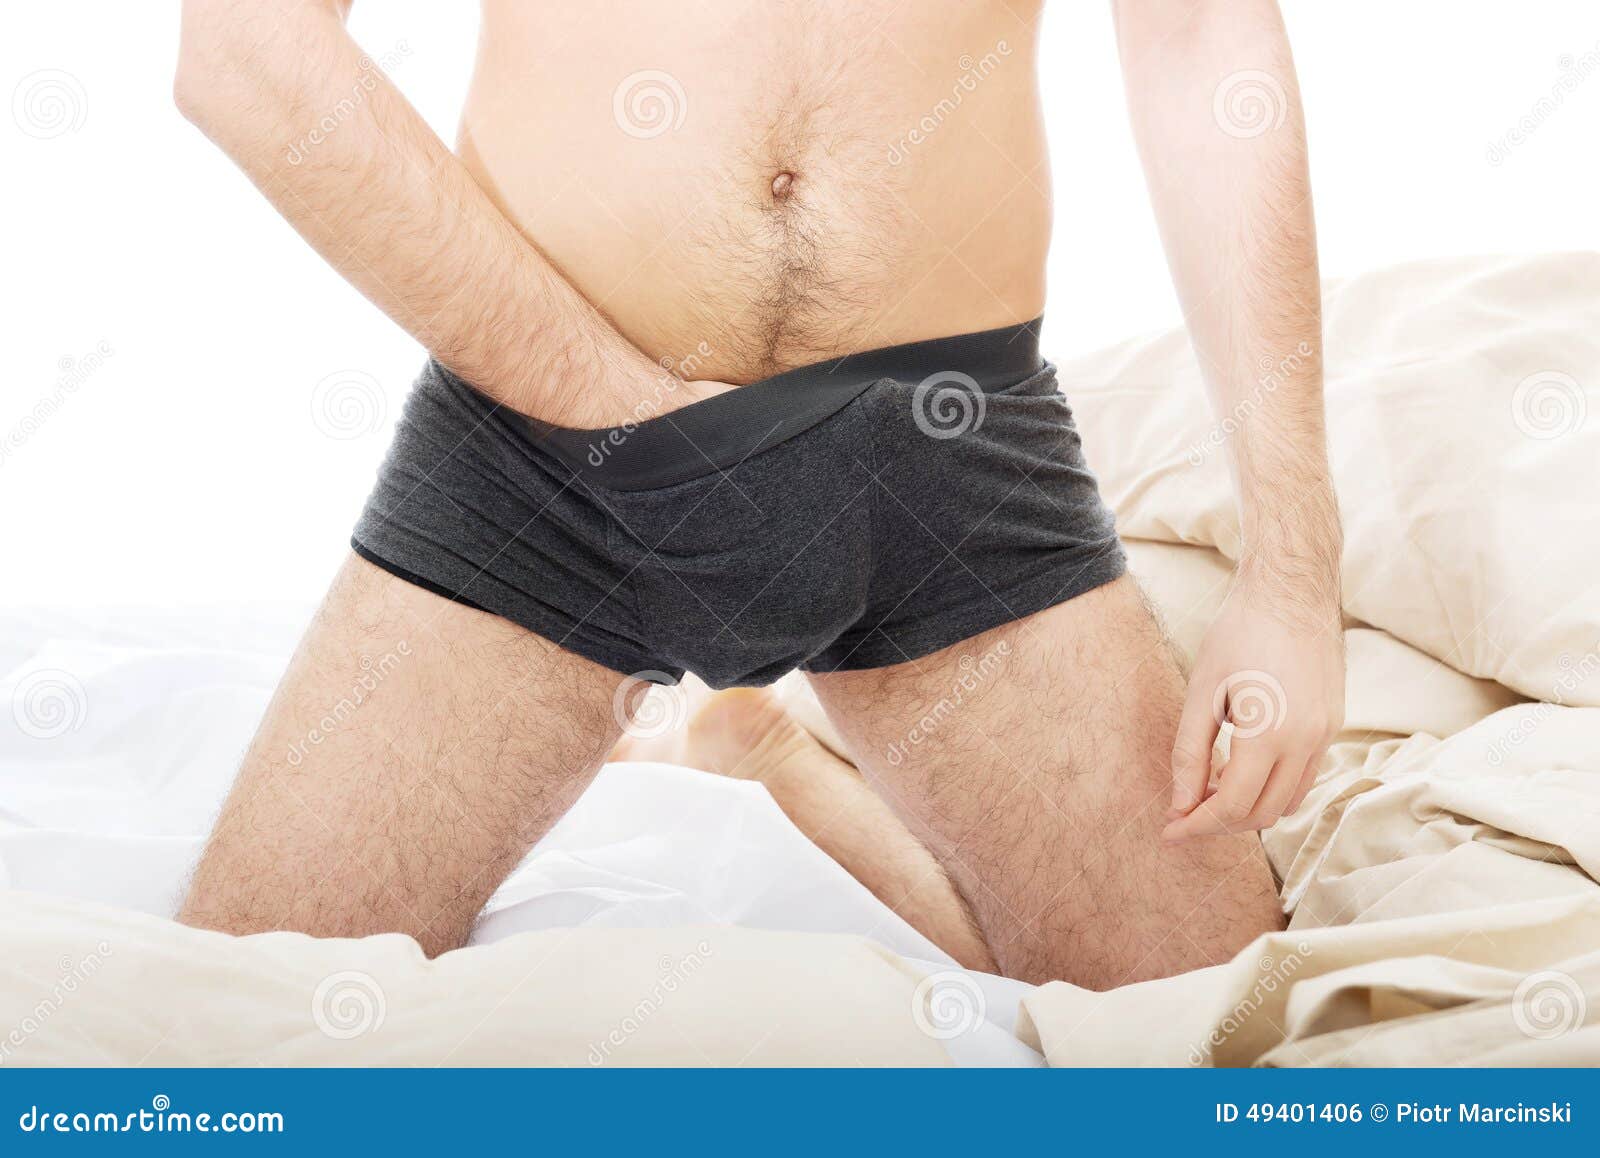 Playful Male Hand in Panties. Stock Photo - Image of hand, bare: 49401406